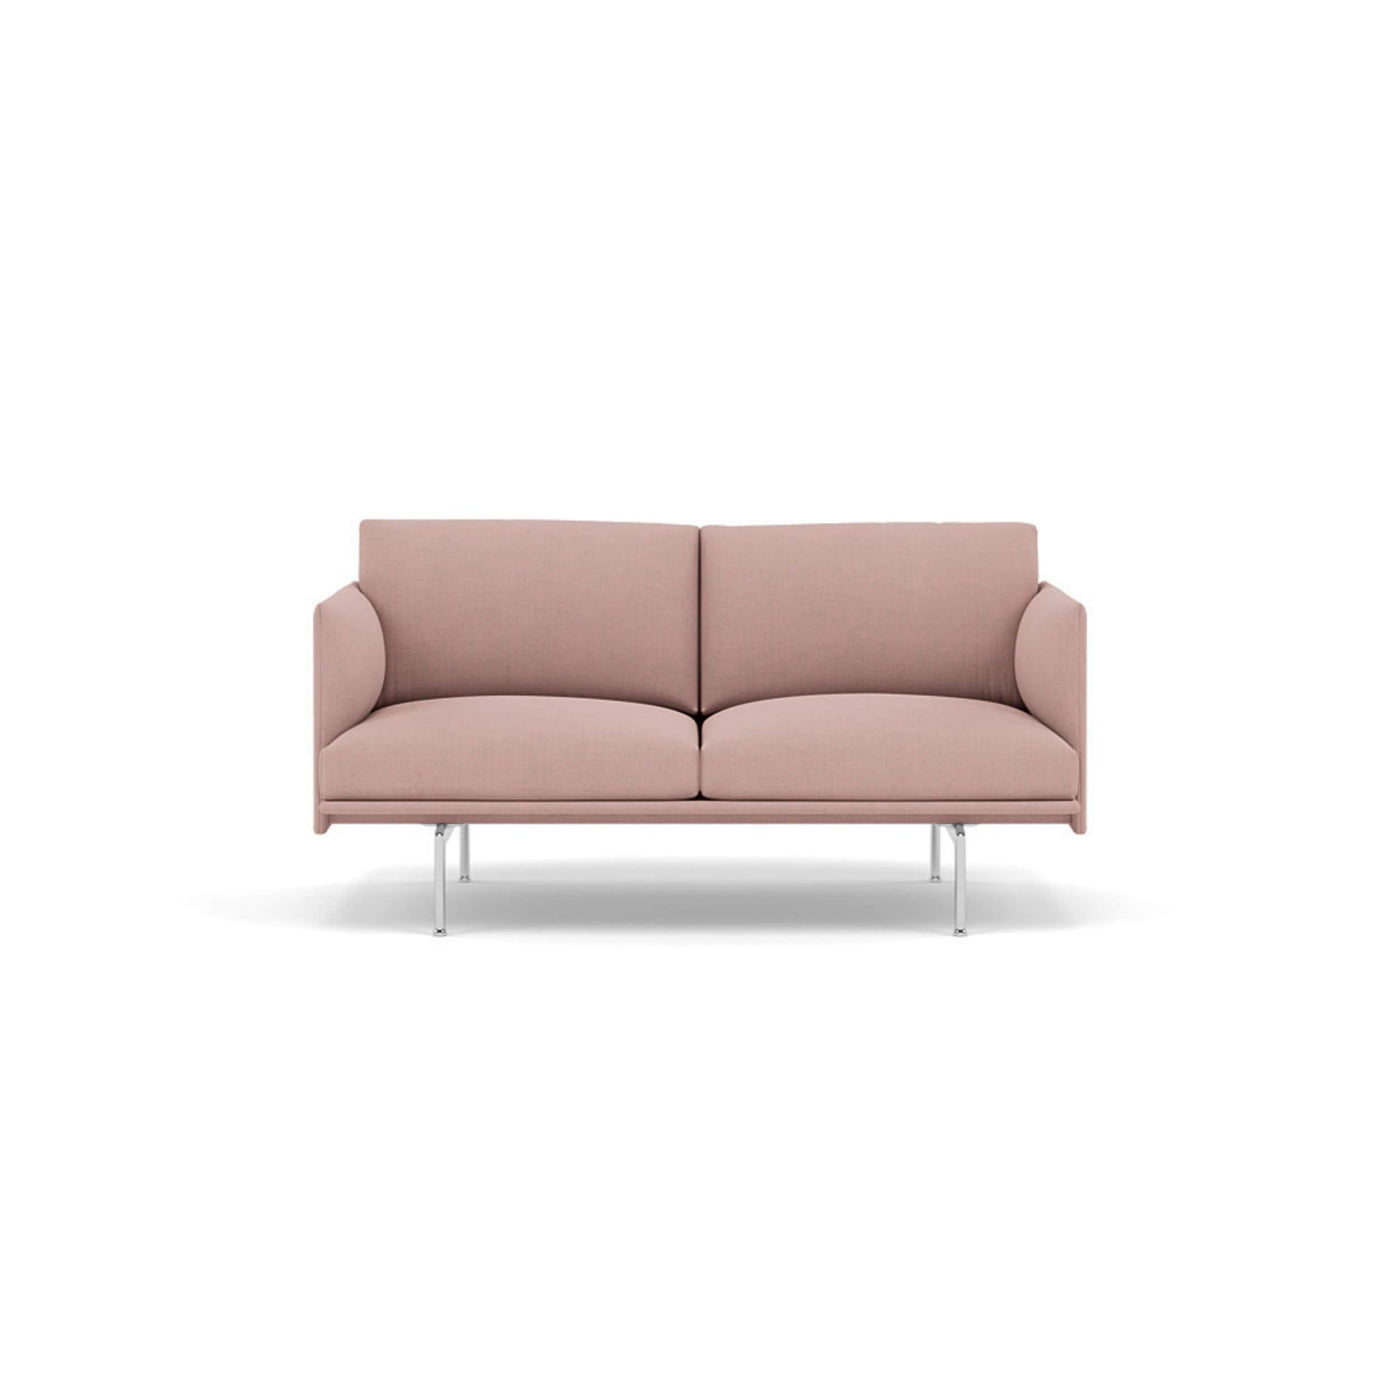 Muuto Outline Studio Sofa. Made to order from someday designs. #colour_fiord-551